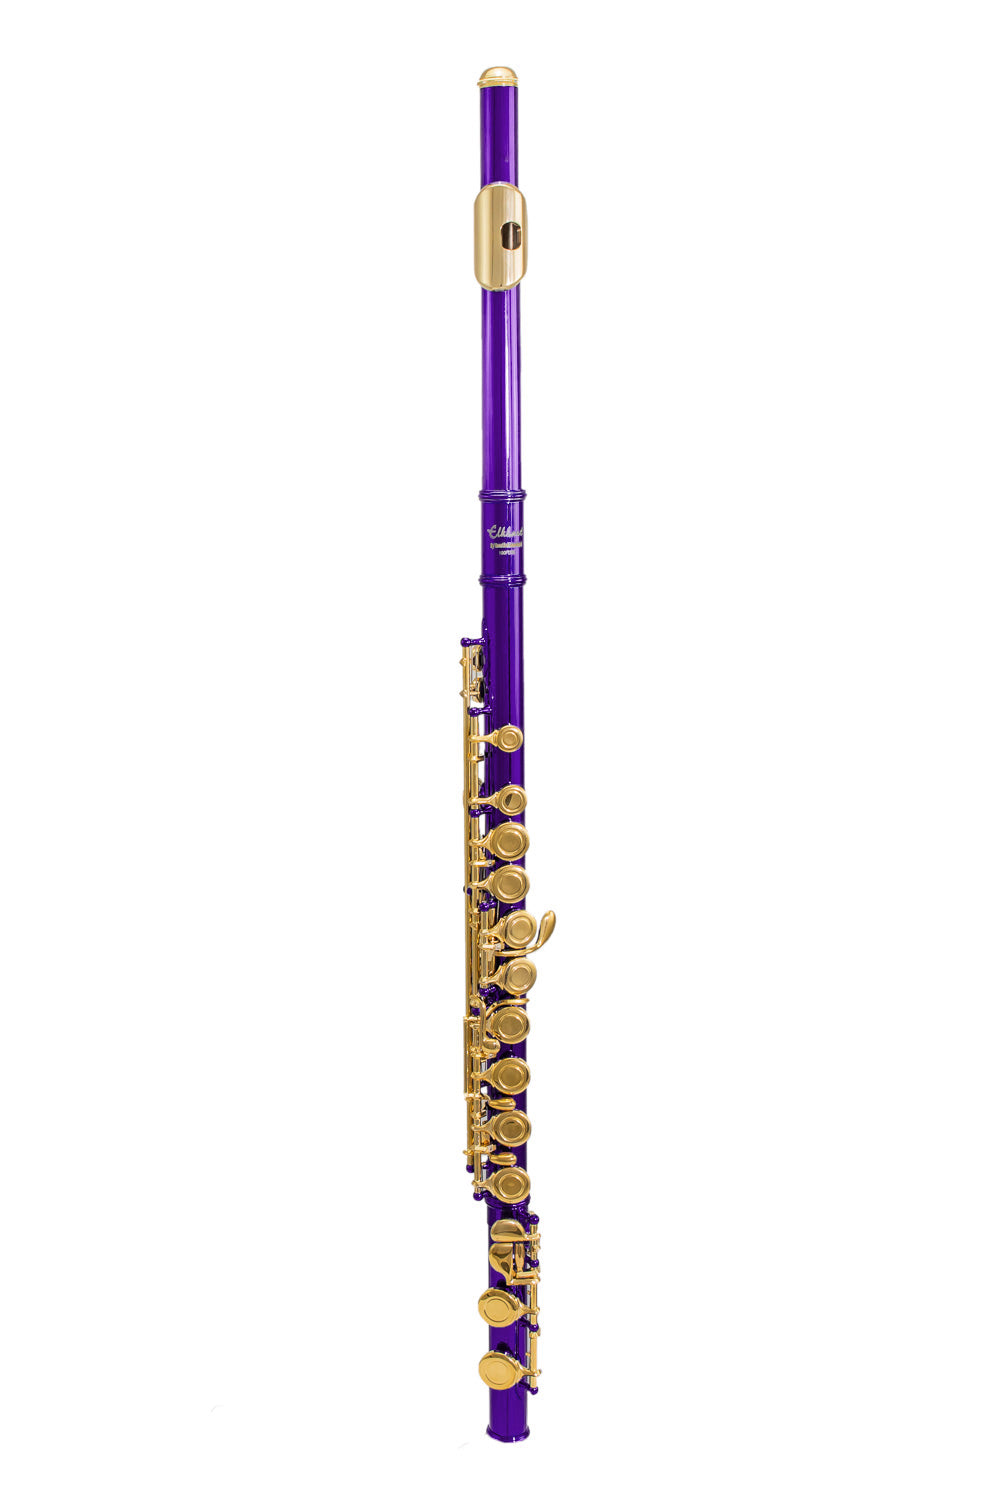 Elkhart by Vincent Bach Flute 100FLP with Case in Purple | Spilt E Mechanism Offset G | RRP £279 Buy Now in Sale At Half Price For £139 - Only Few Left!